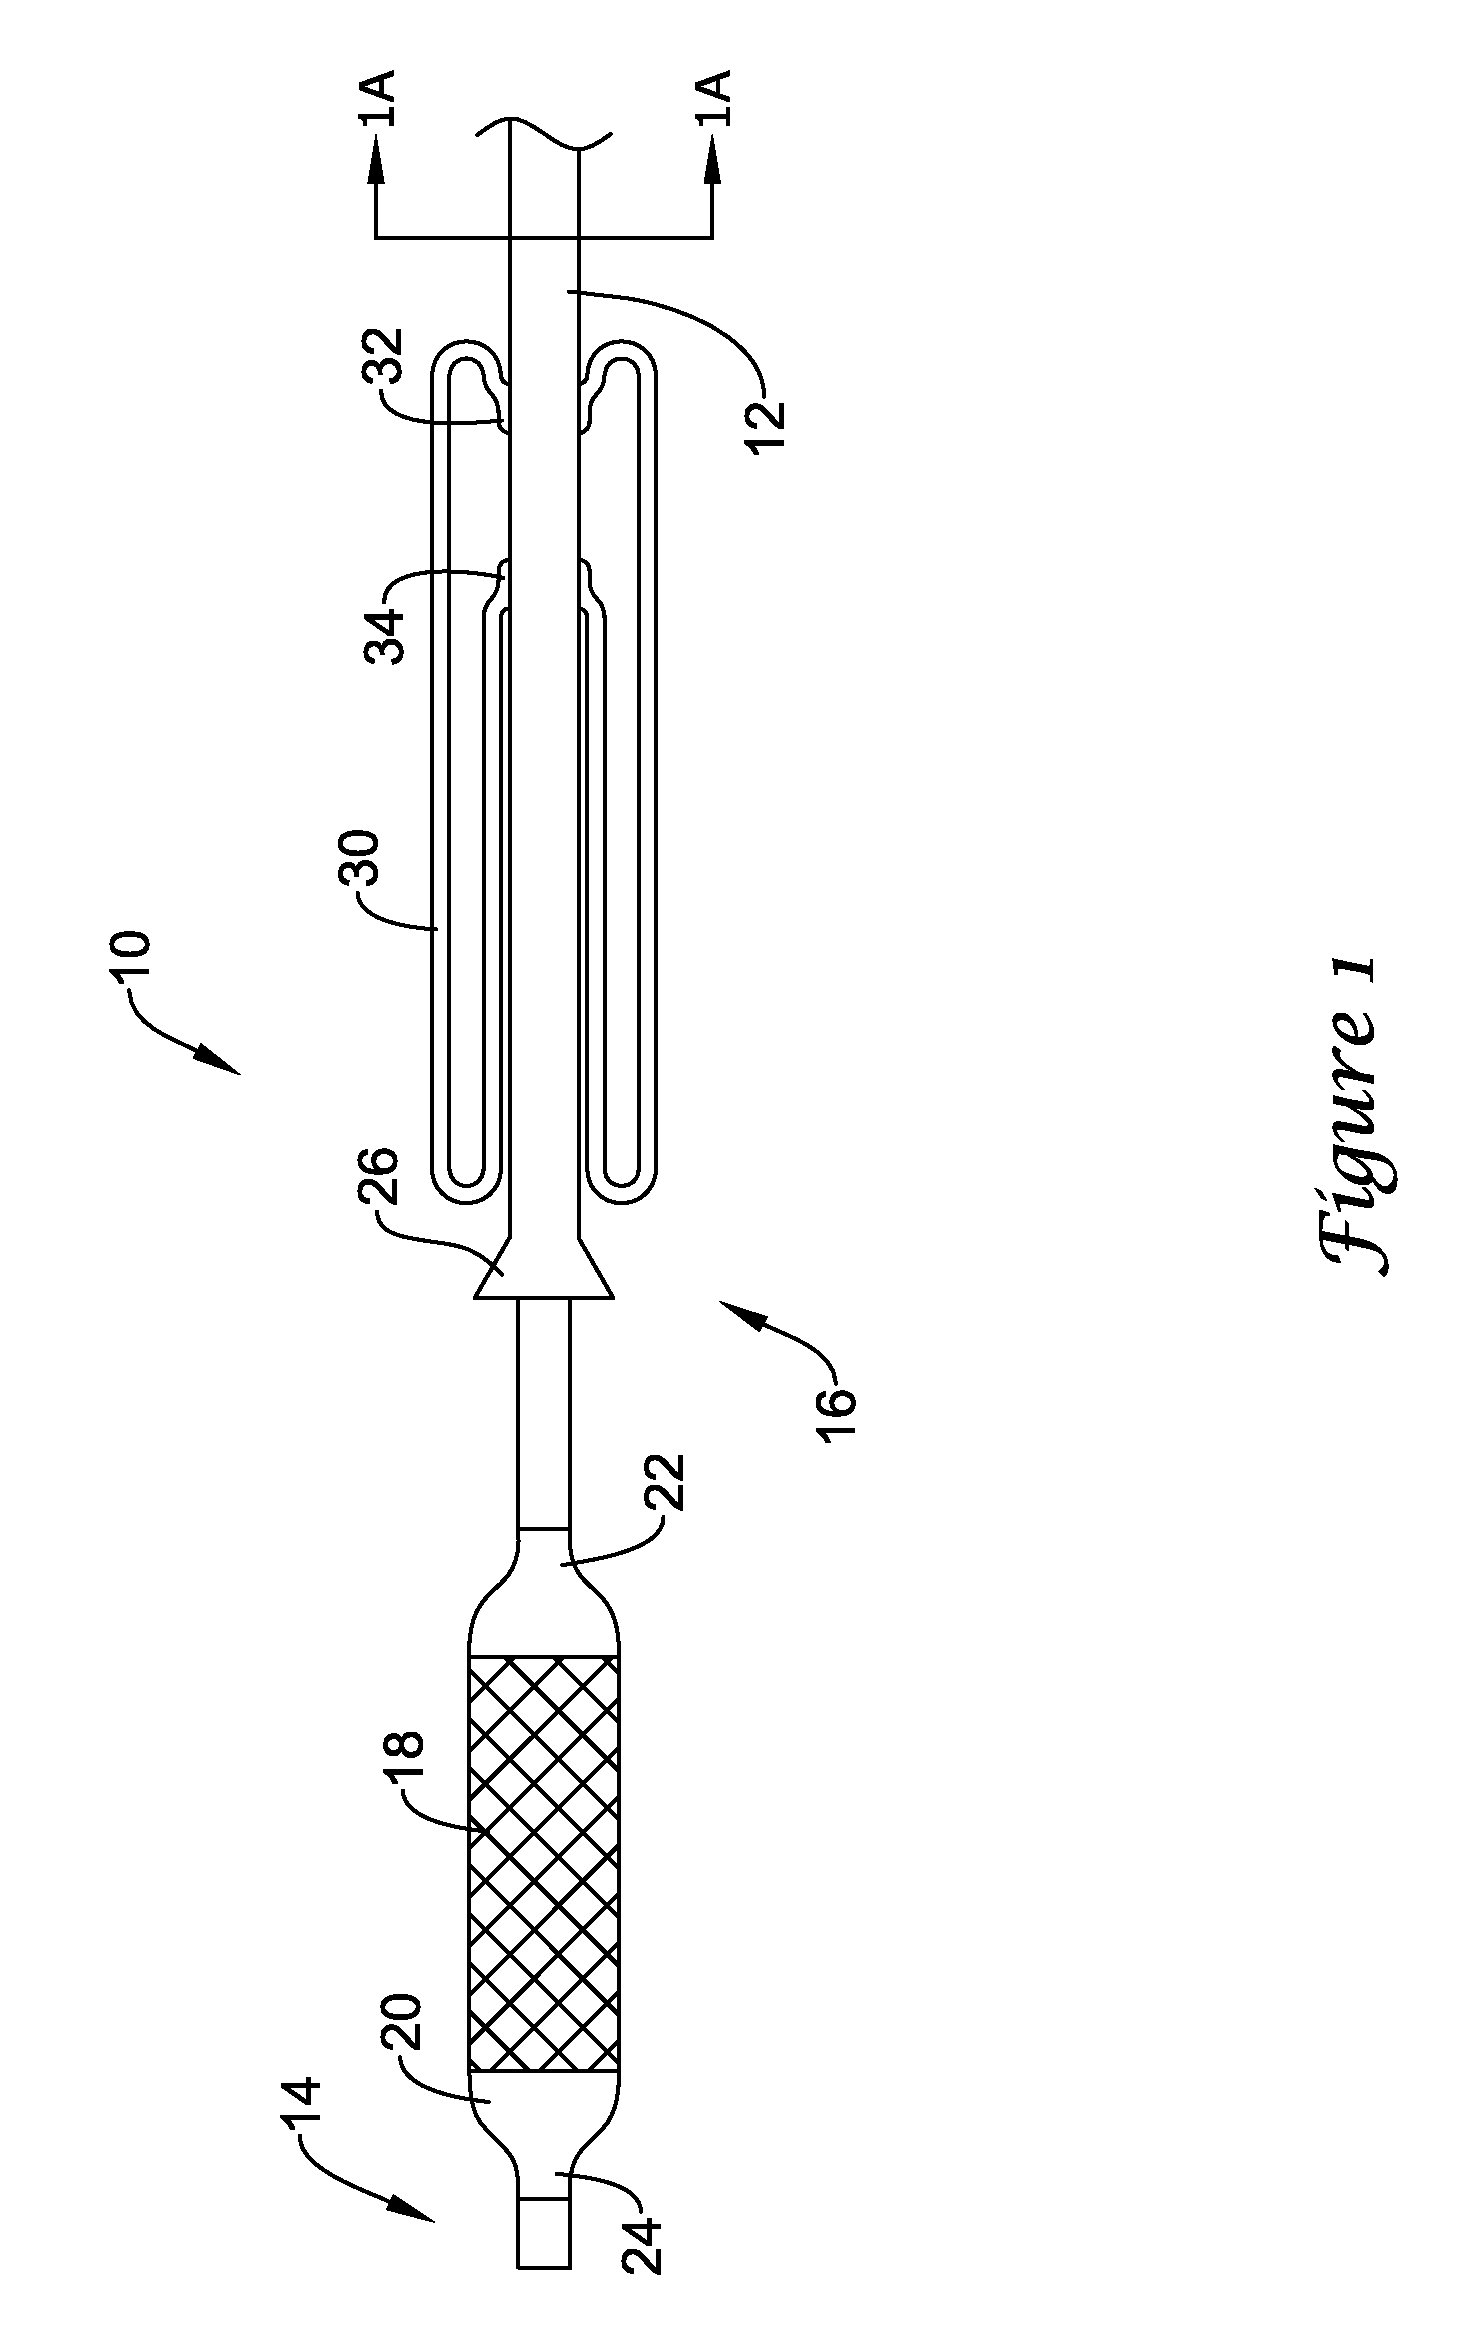 Occlusion crossing device and method